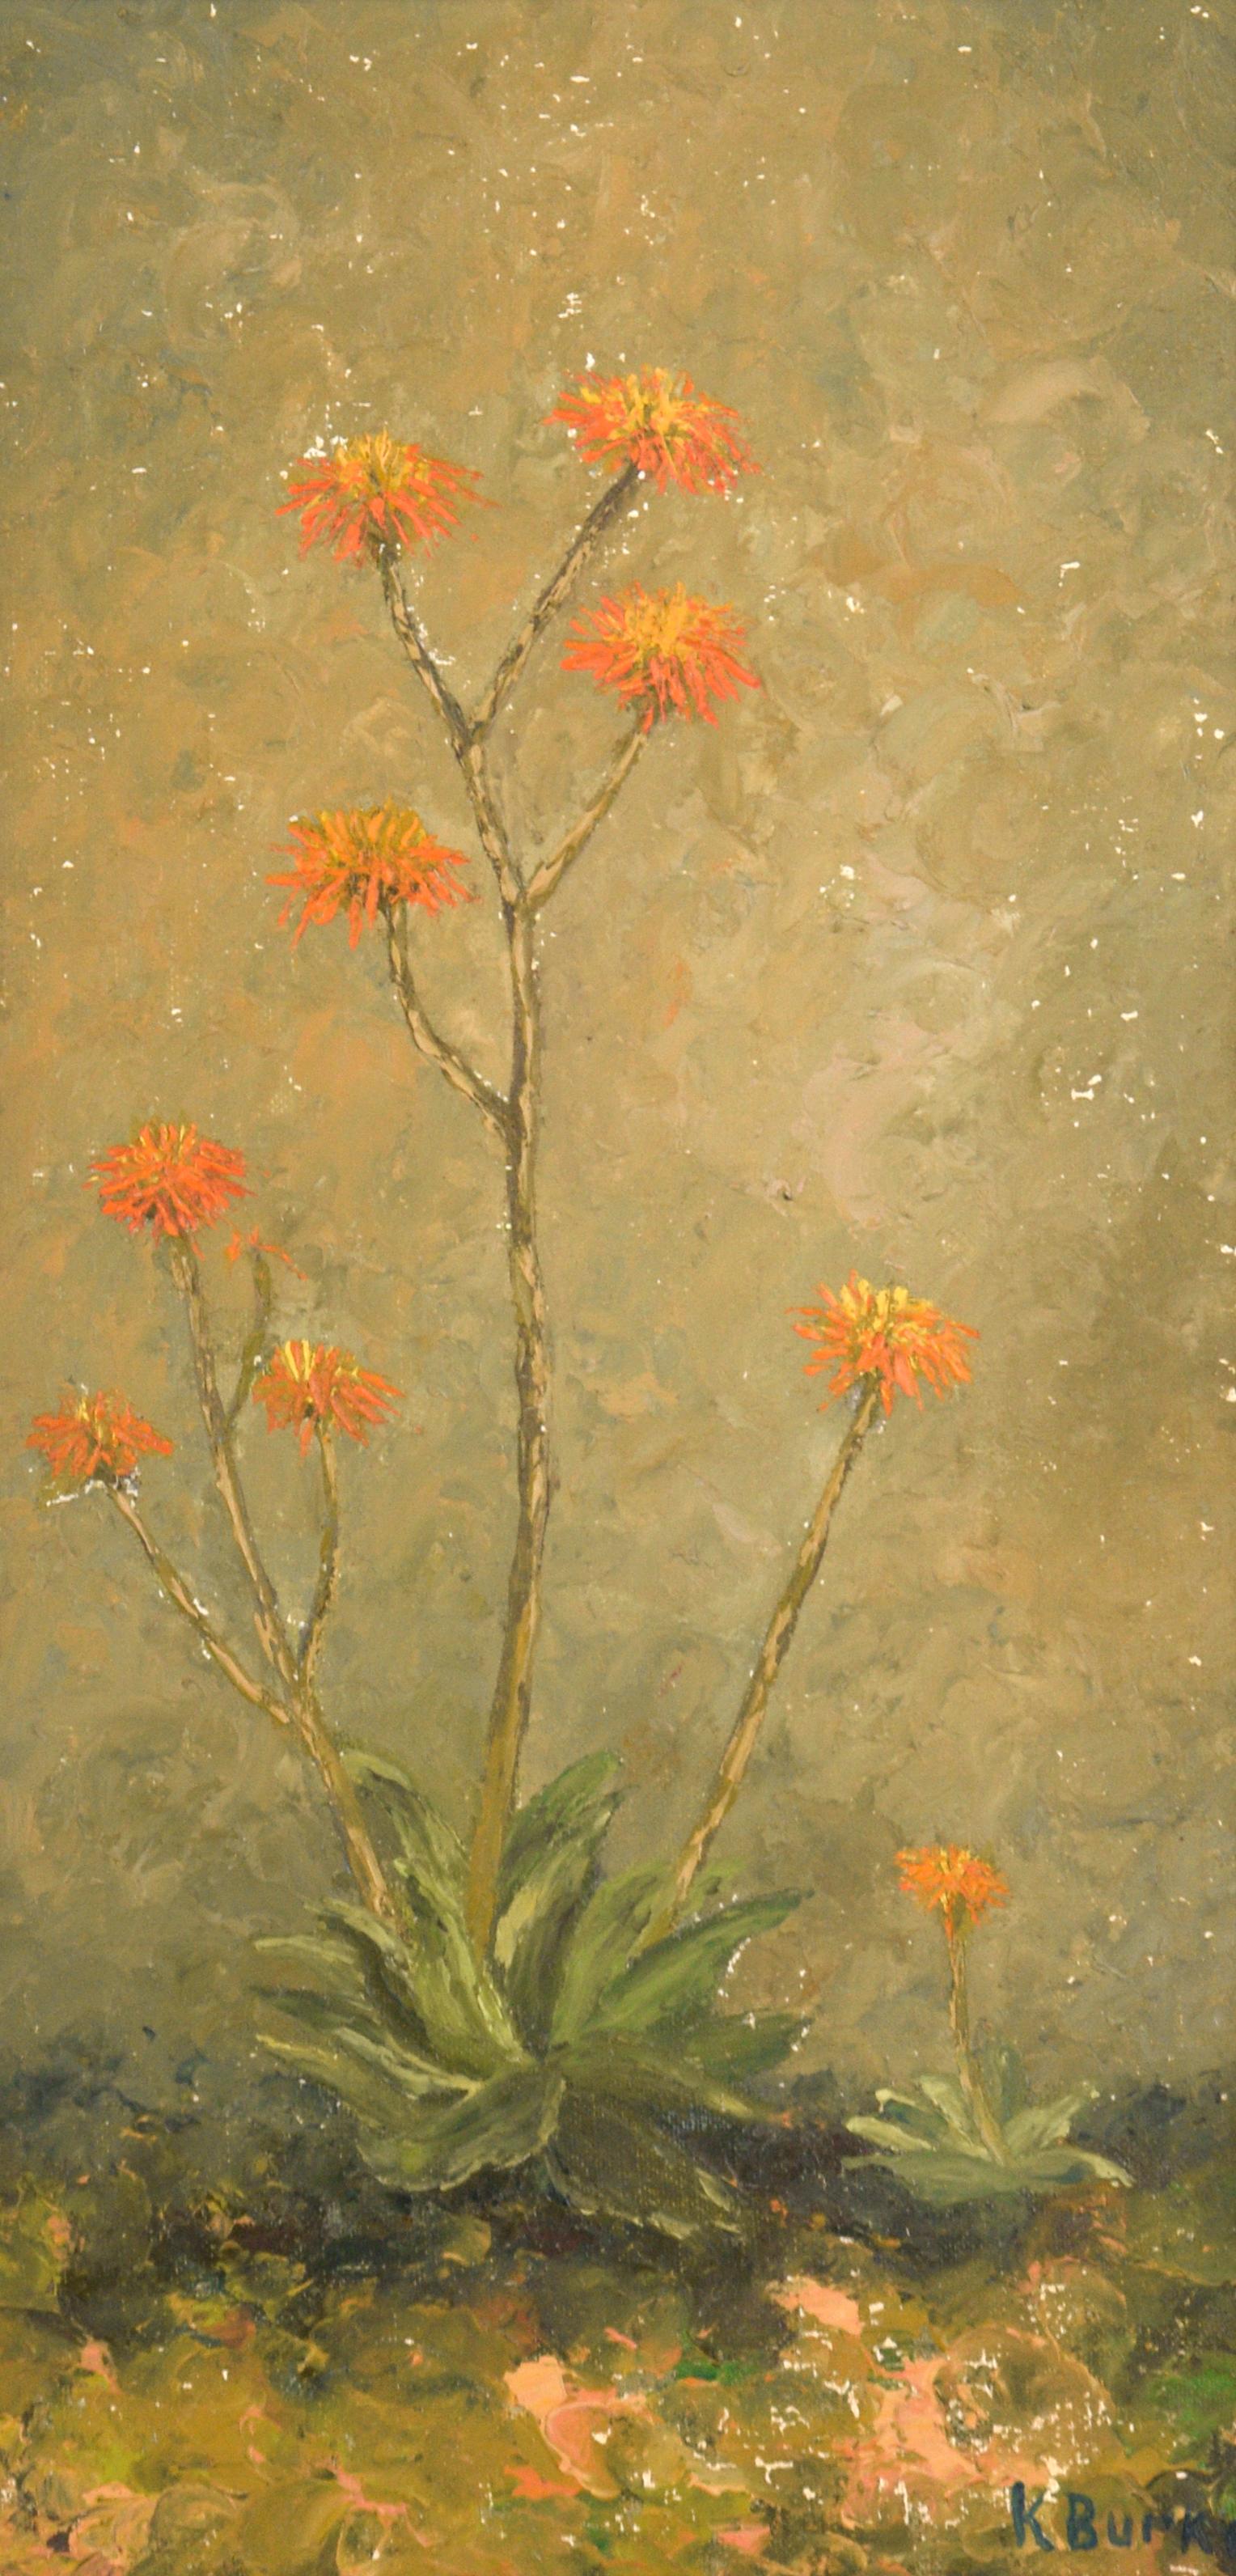 Coral Aloe in Bloom - Botanical Study - Painting by K Burke